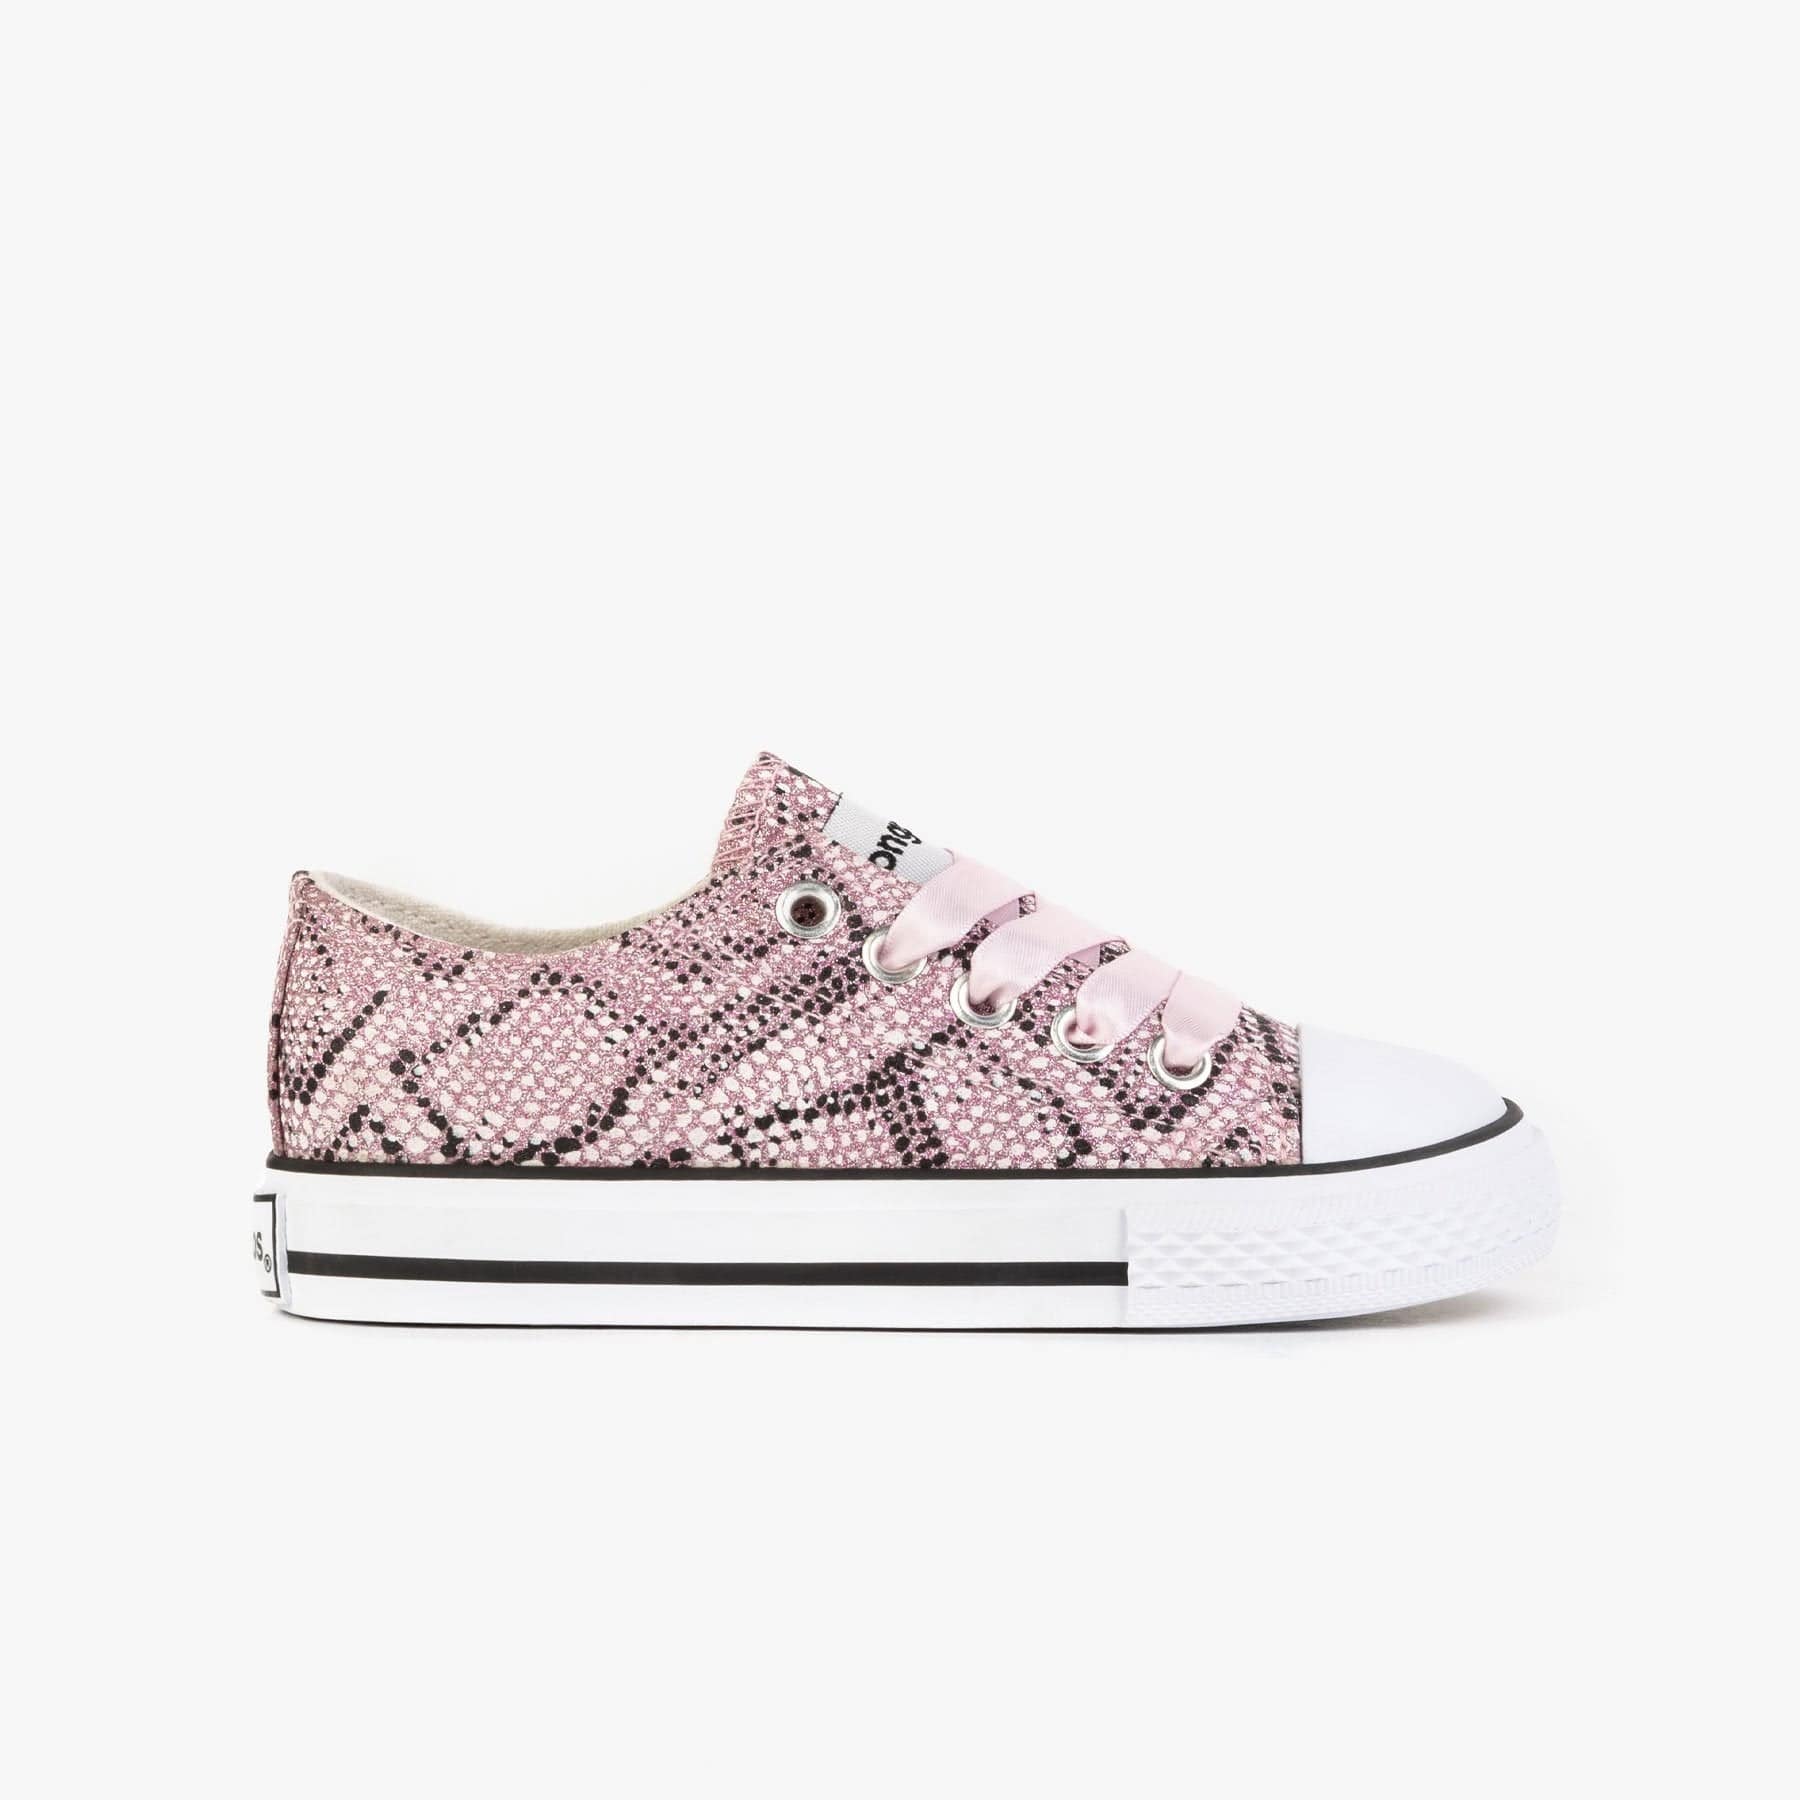 CONGUITOS Shoes Girl's "Snake" Pink Sneakers